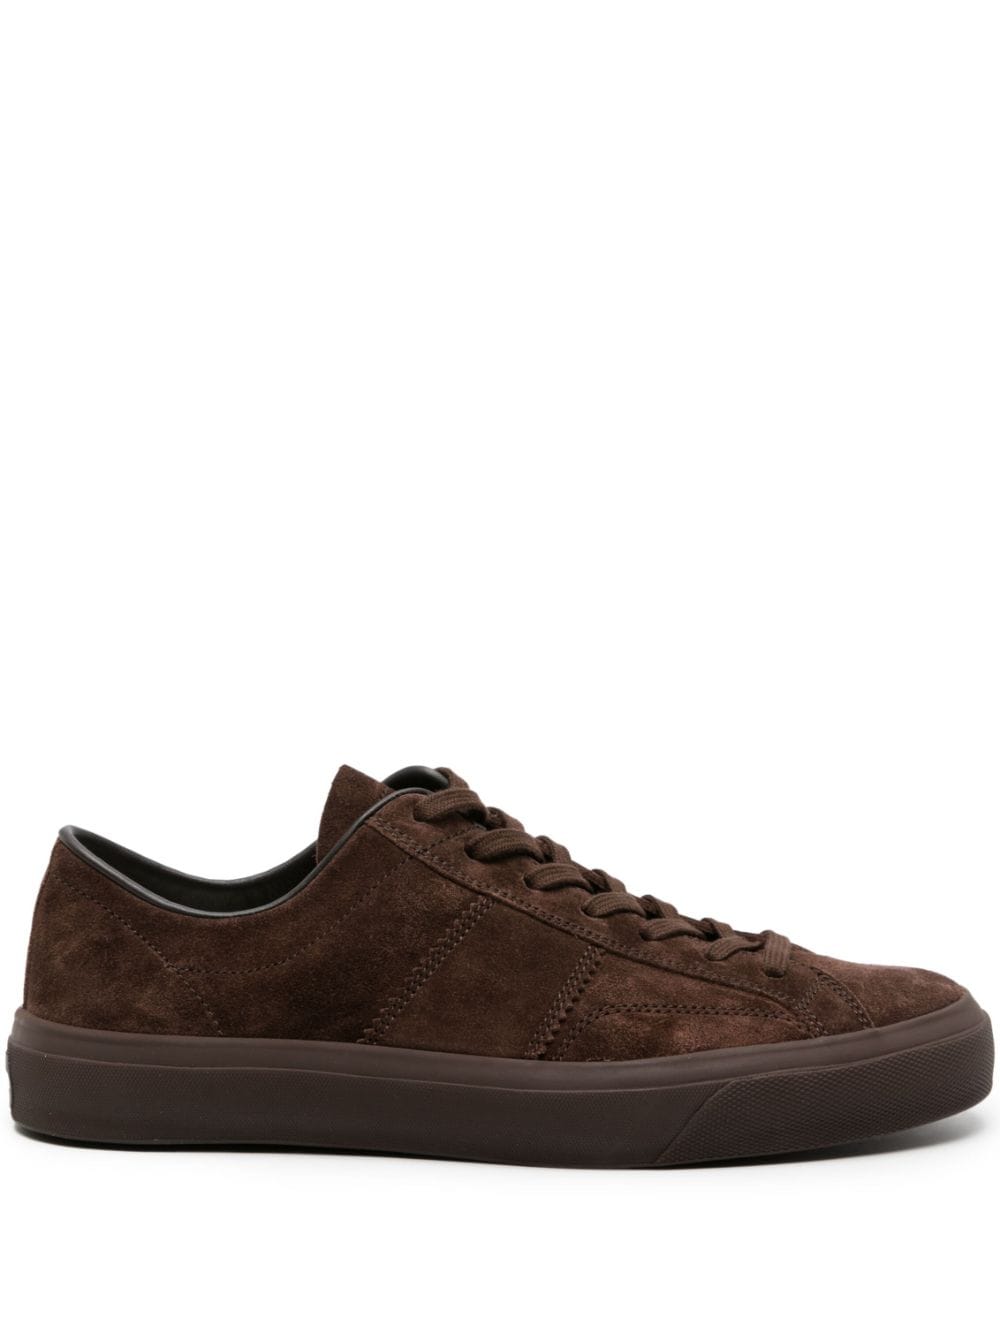 TOM FORD Cambridge suede sneakers - Brown von TOM FORD